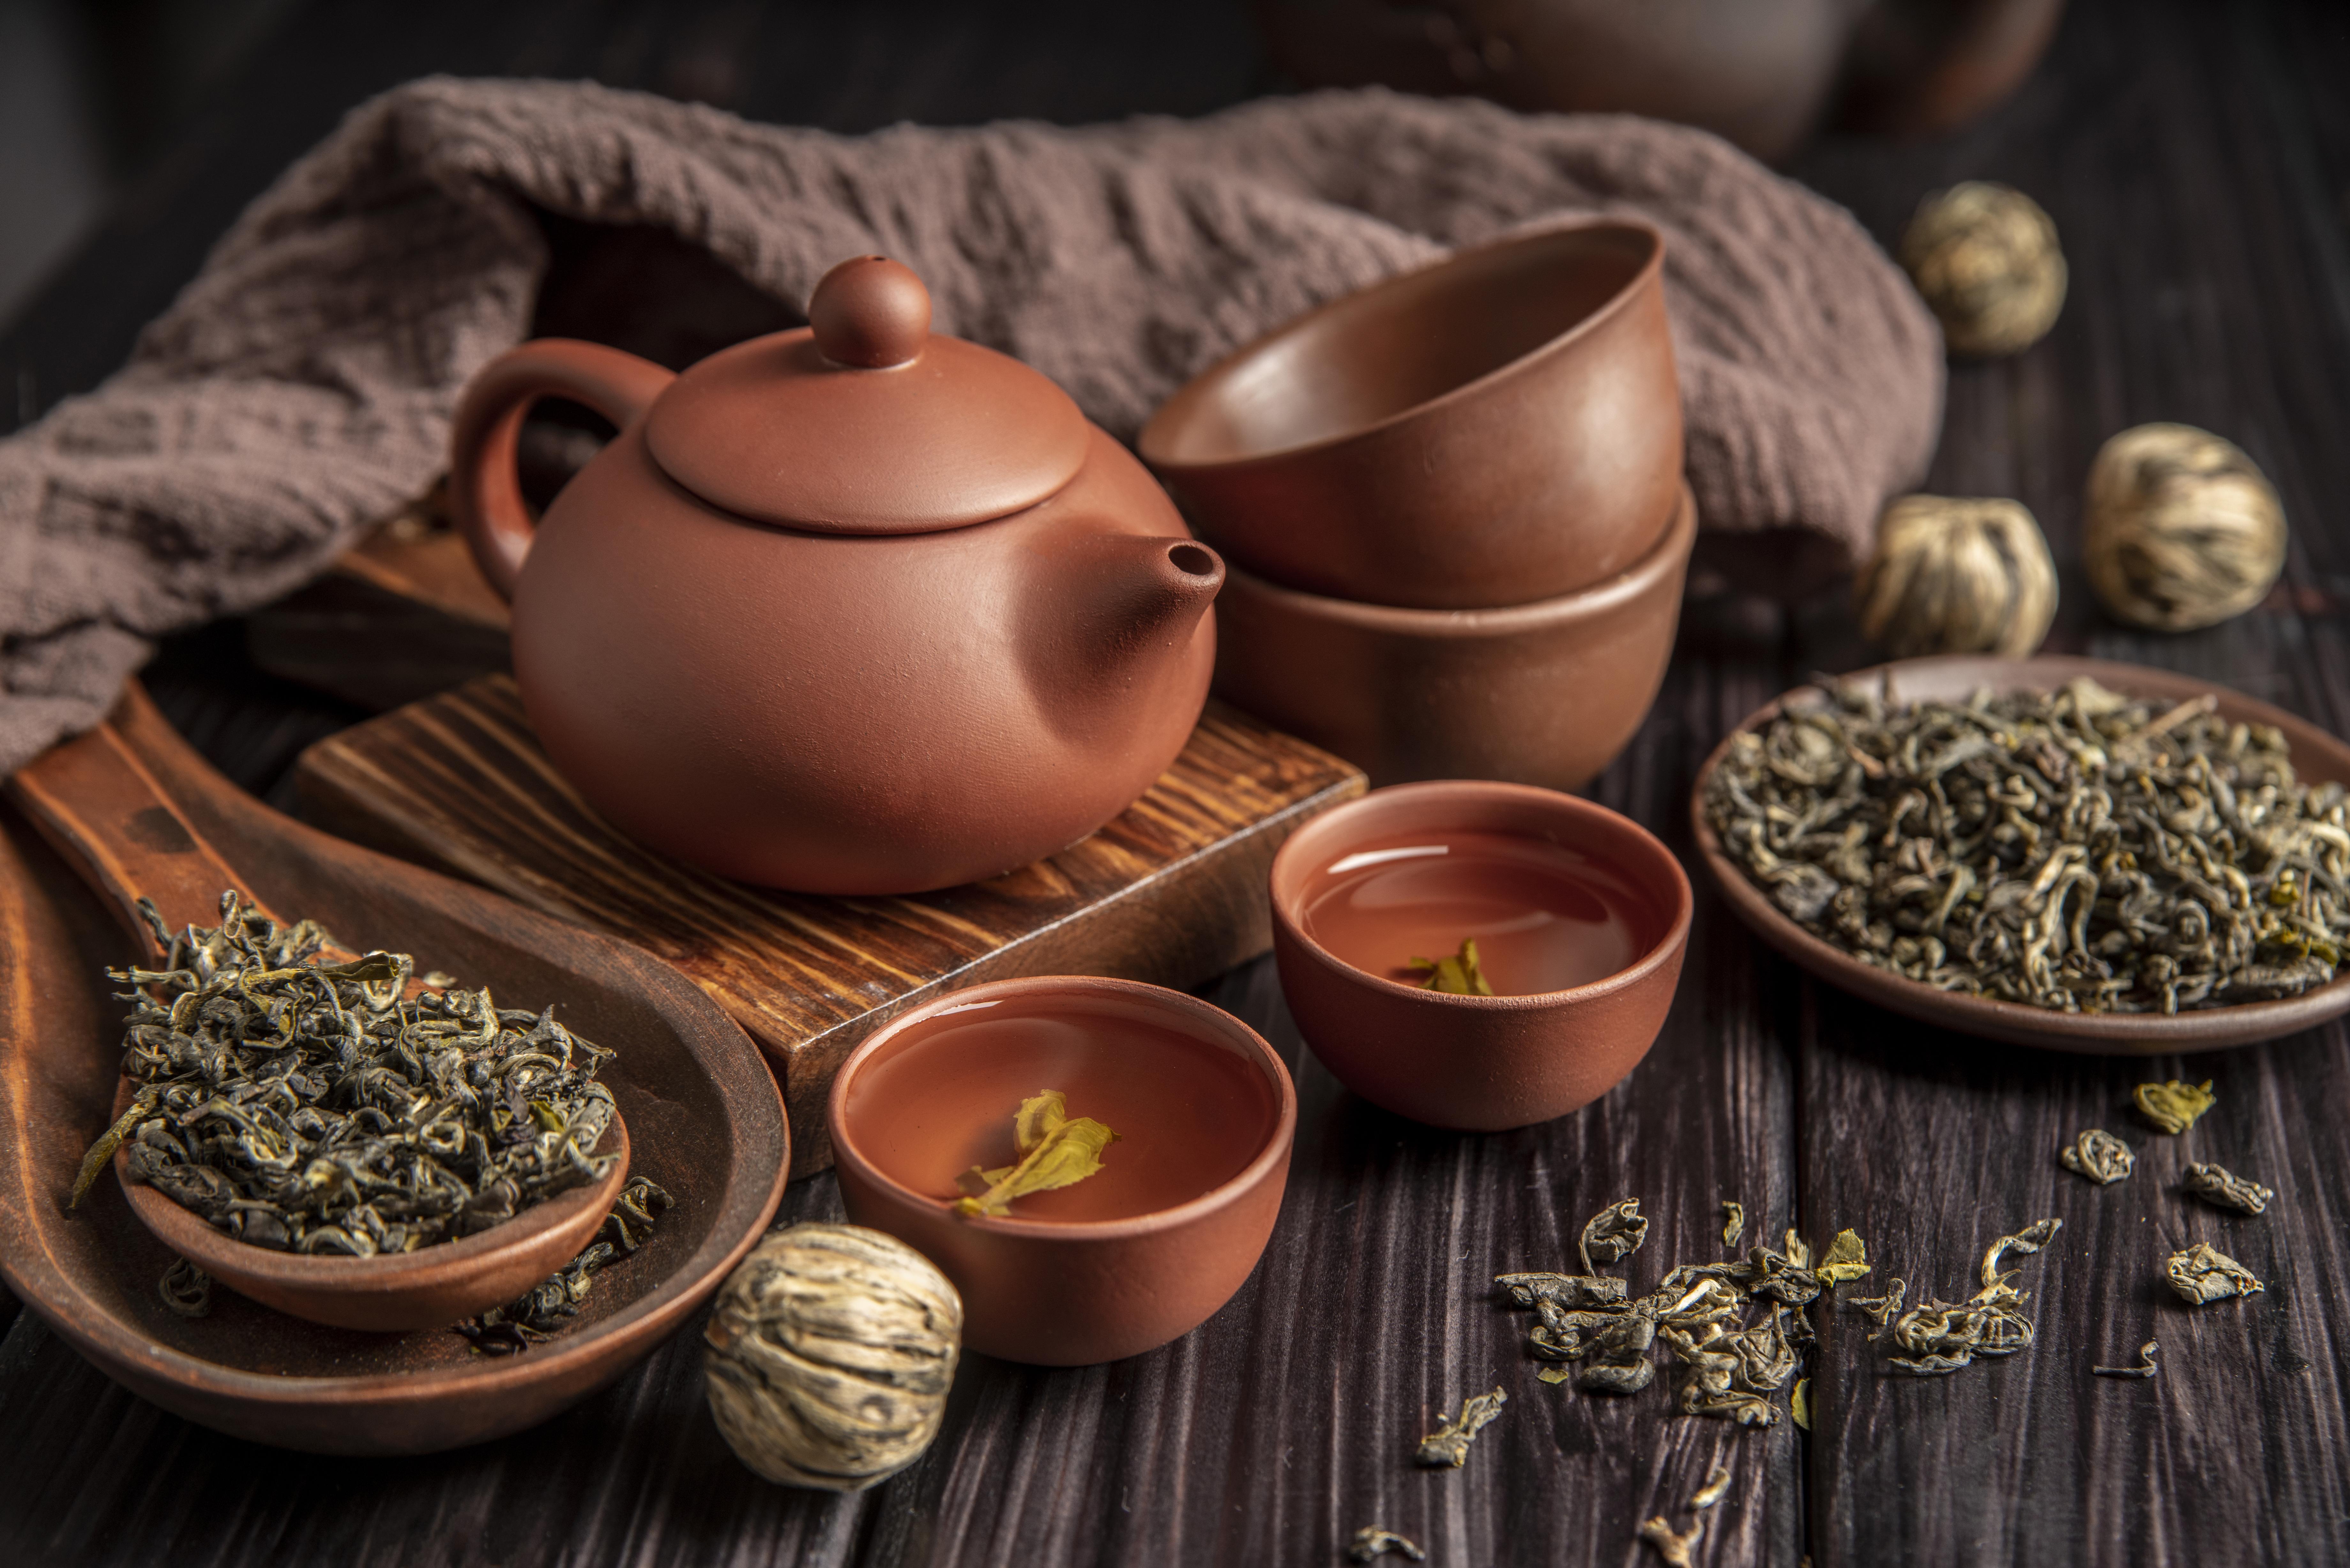 Your Complete Guide to Different Types of Chinese Tea